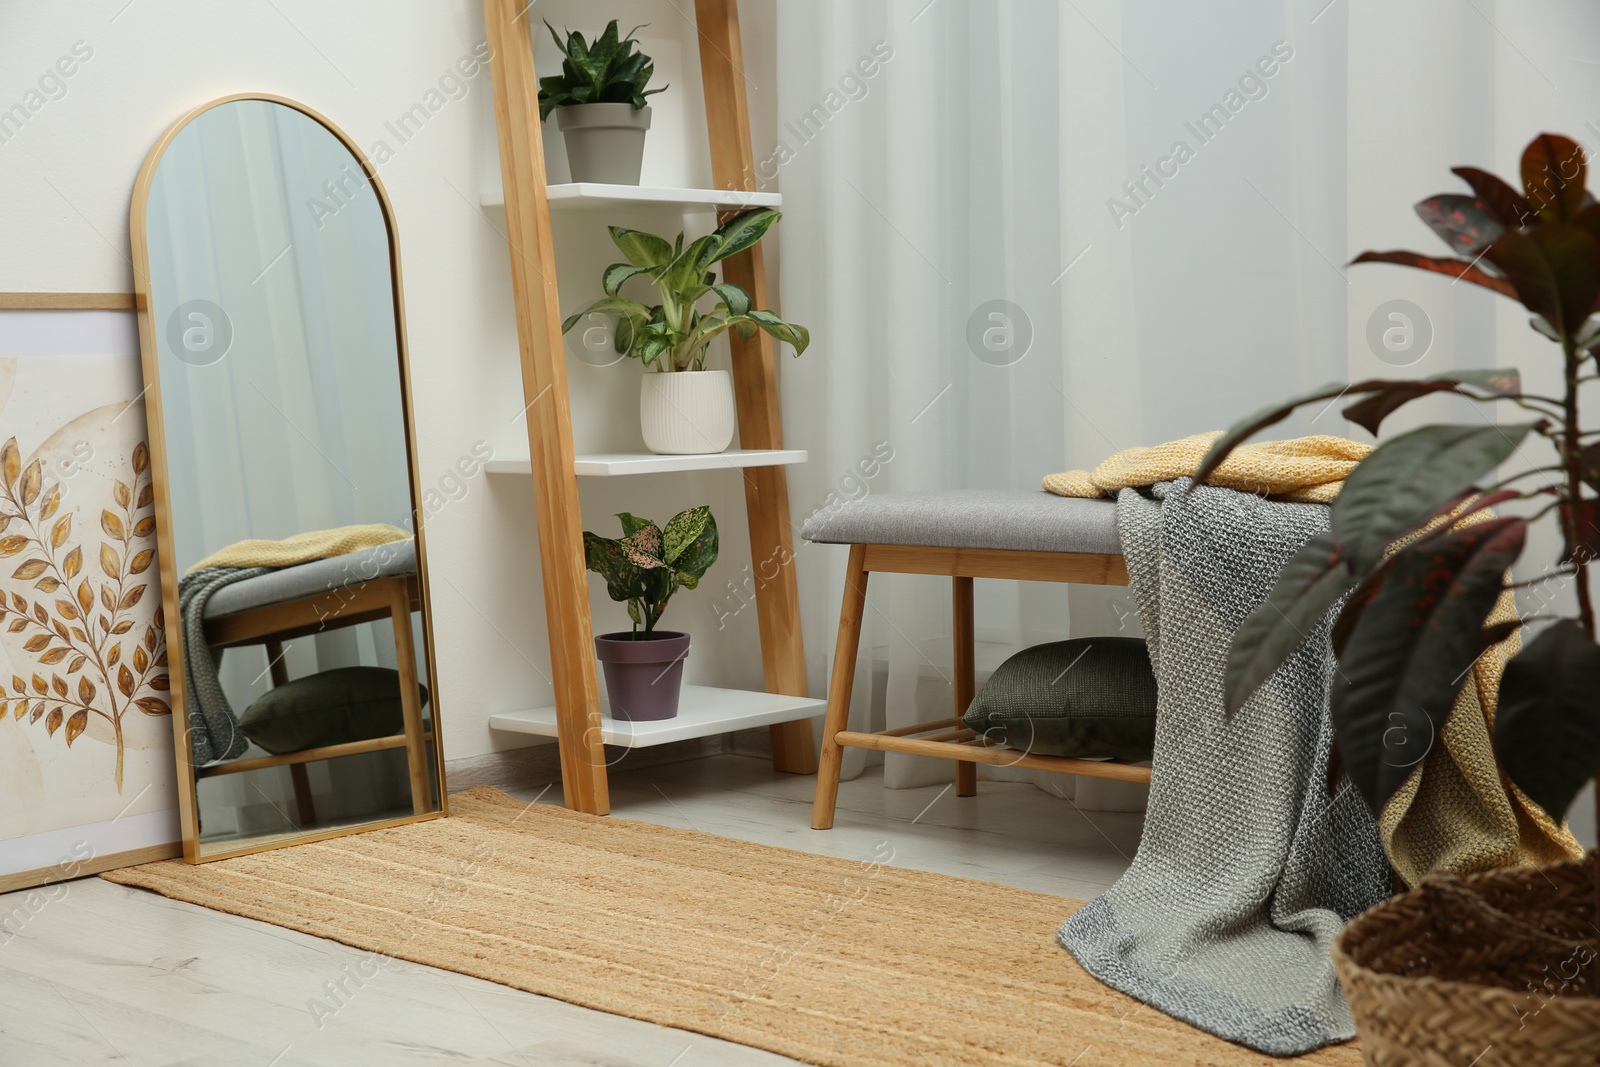 Photo of Room interior with wooden furniture, mirror and houseplants. Stylish accessories